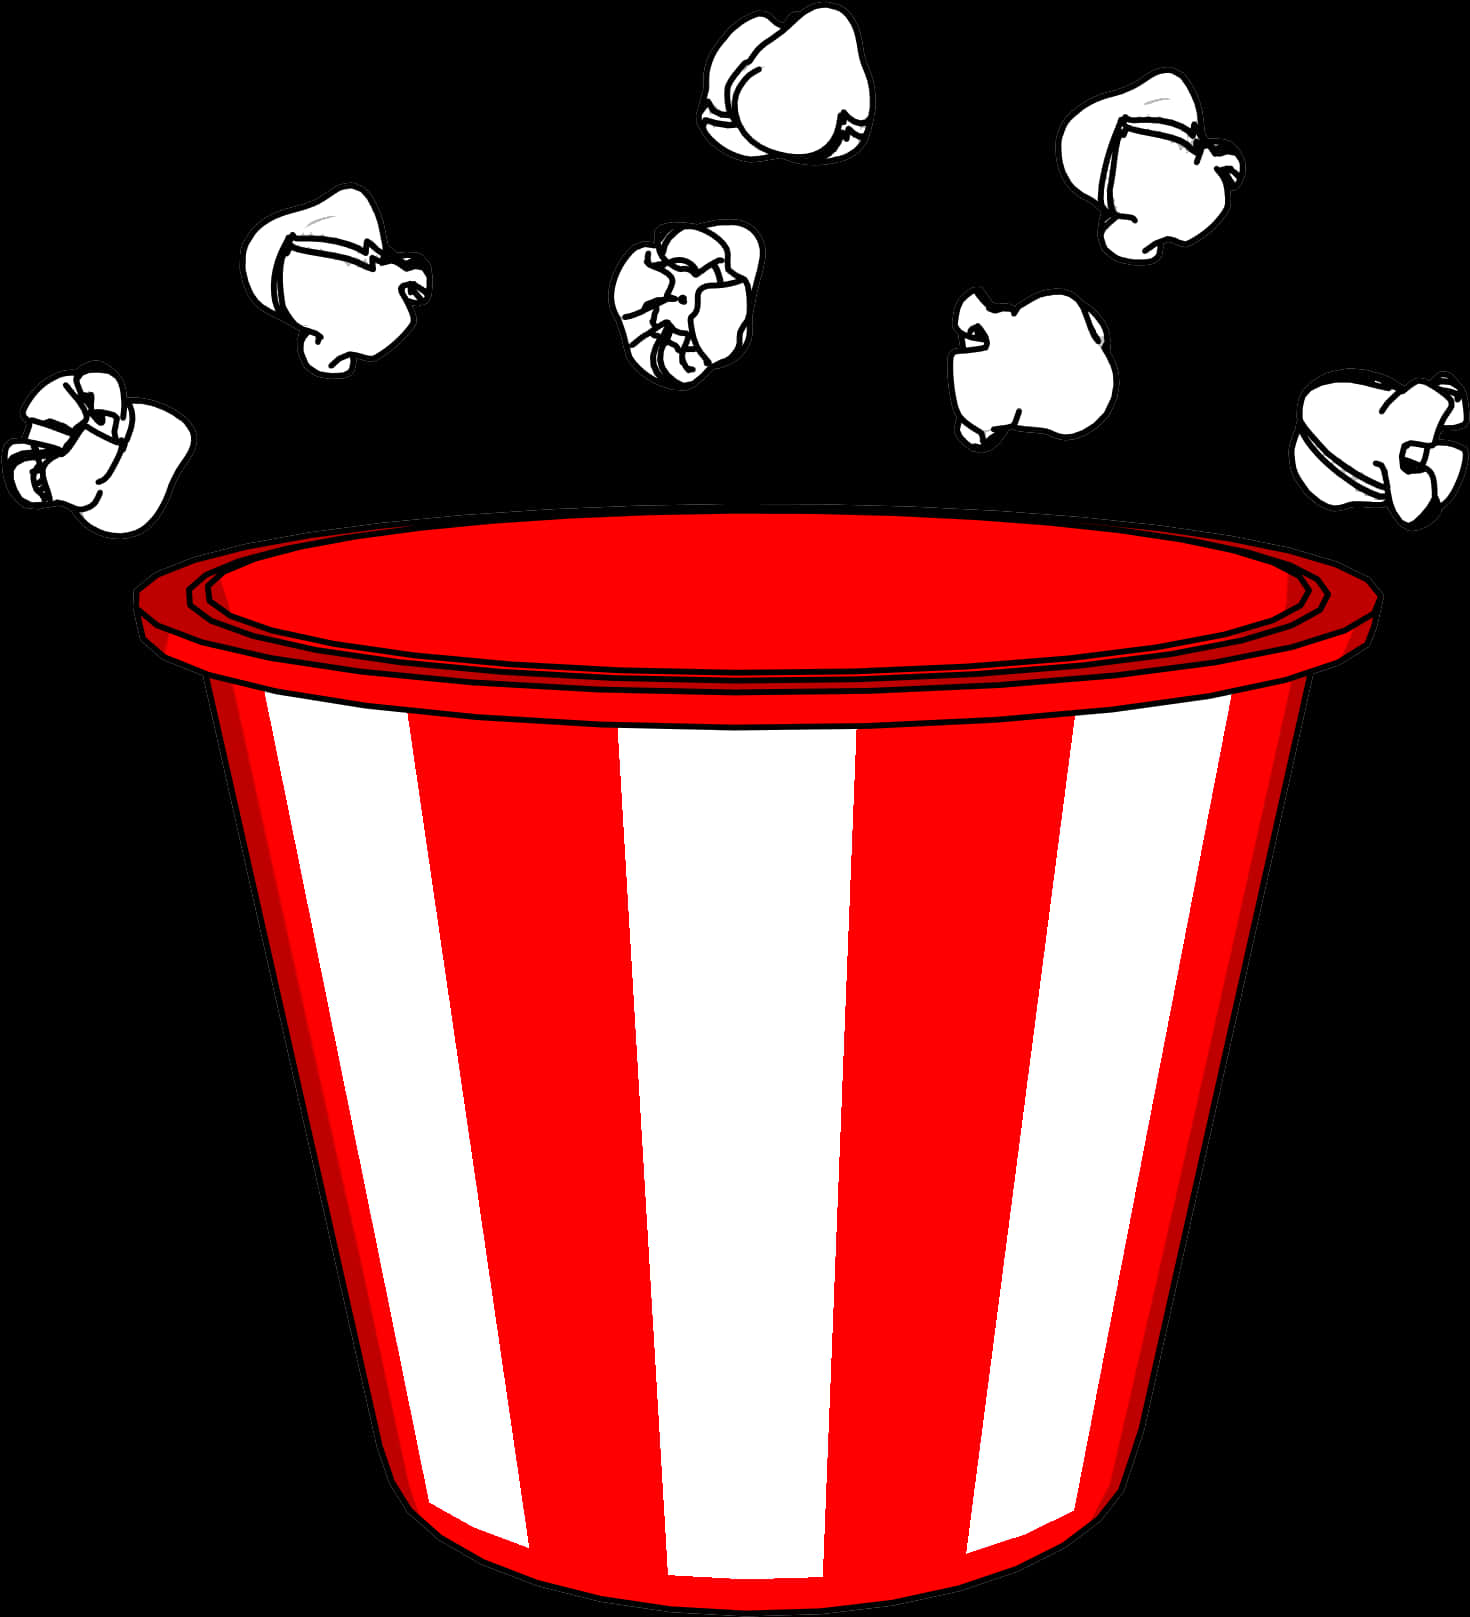 Red Striped Popcorn Bucket Clipart PNG image